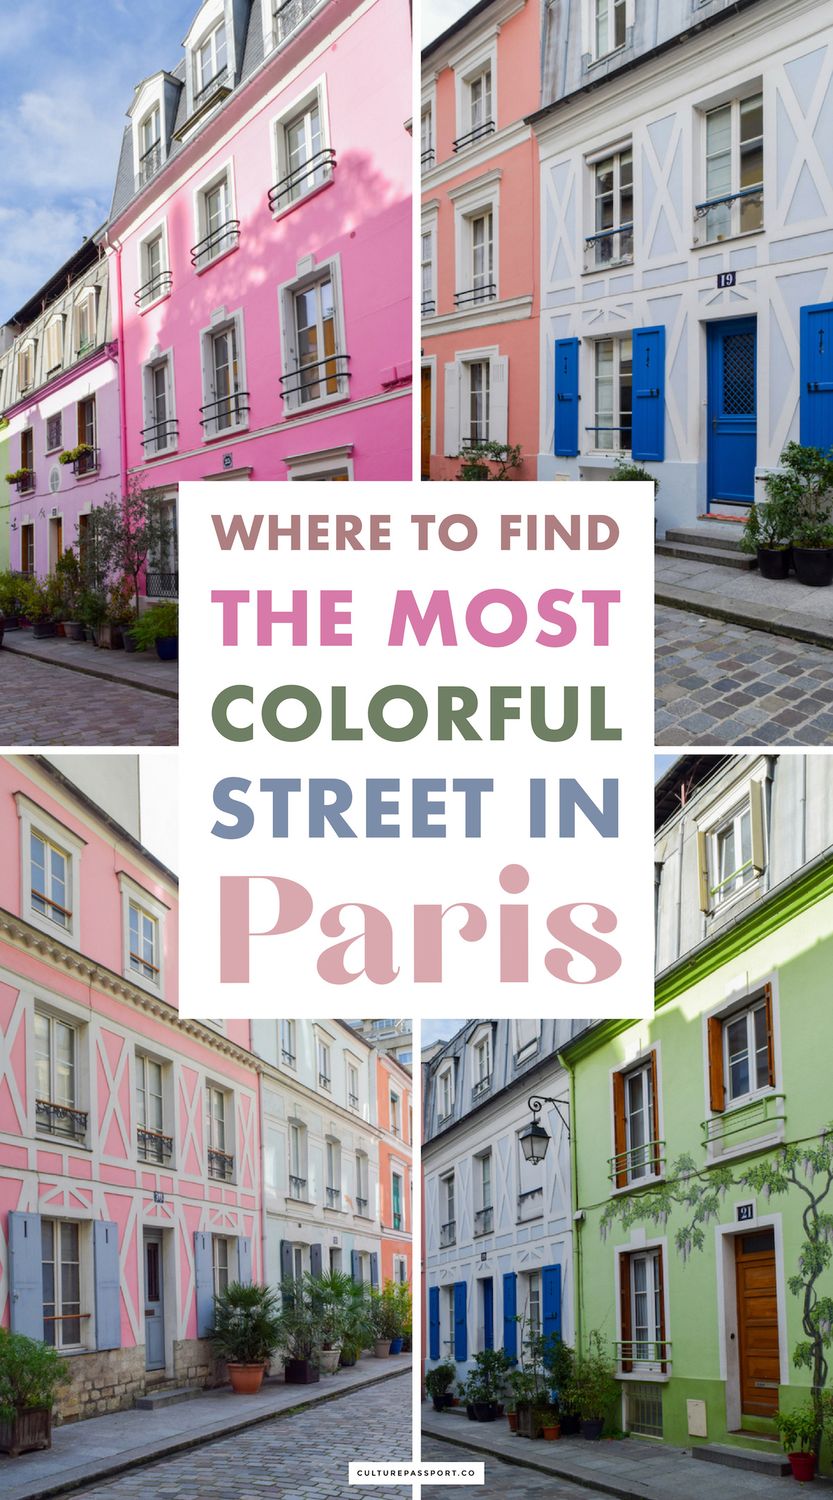 Where to Find the Most Colorful Street in Paris: Rue Crémieux